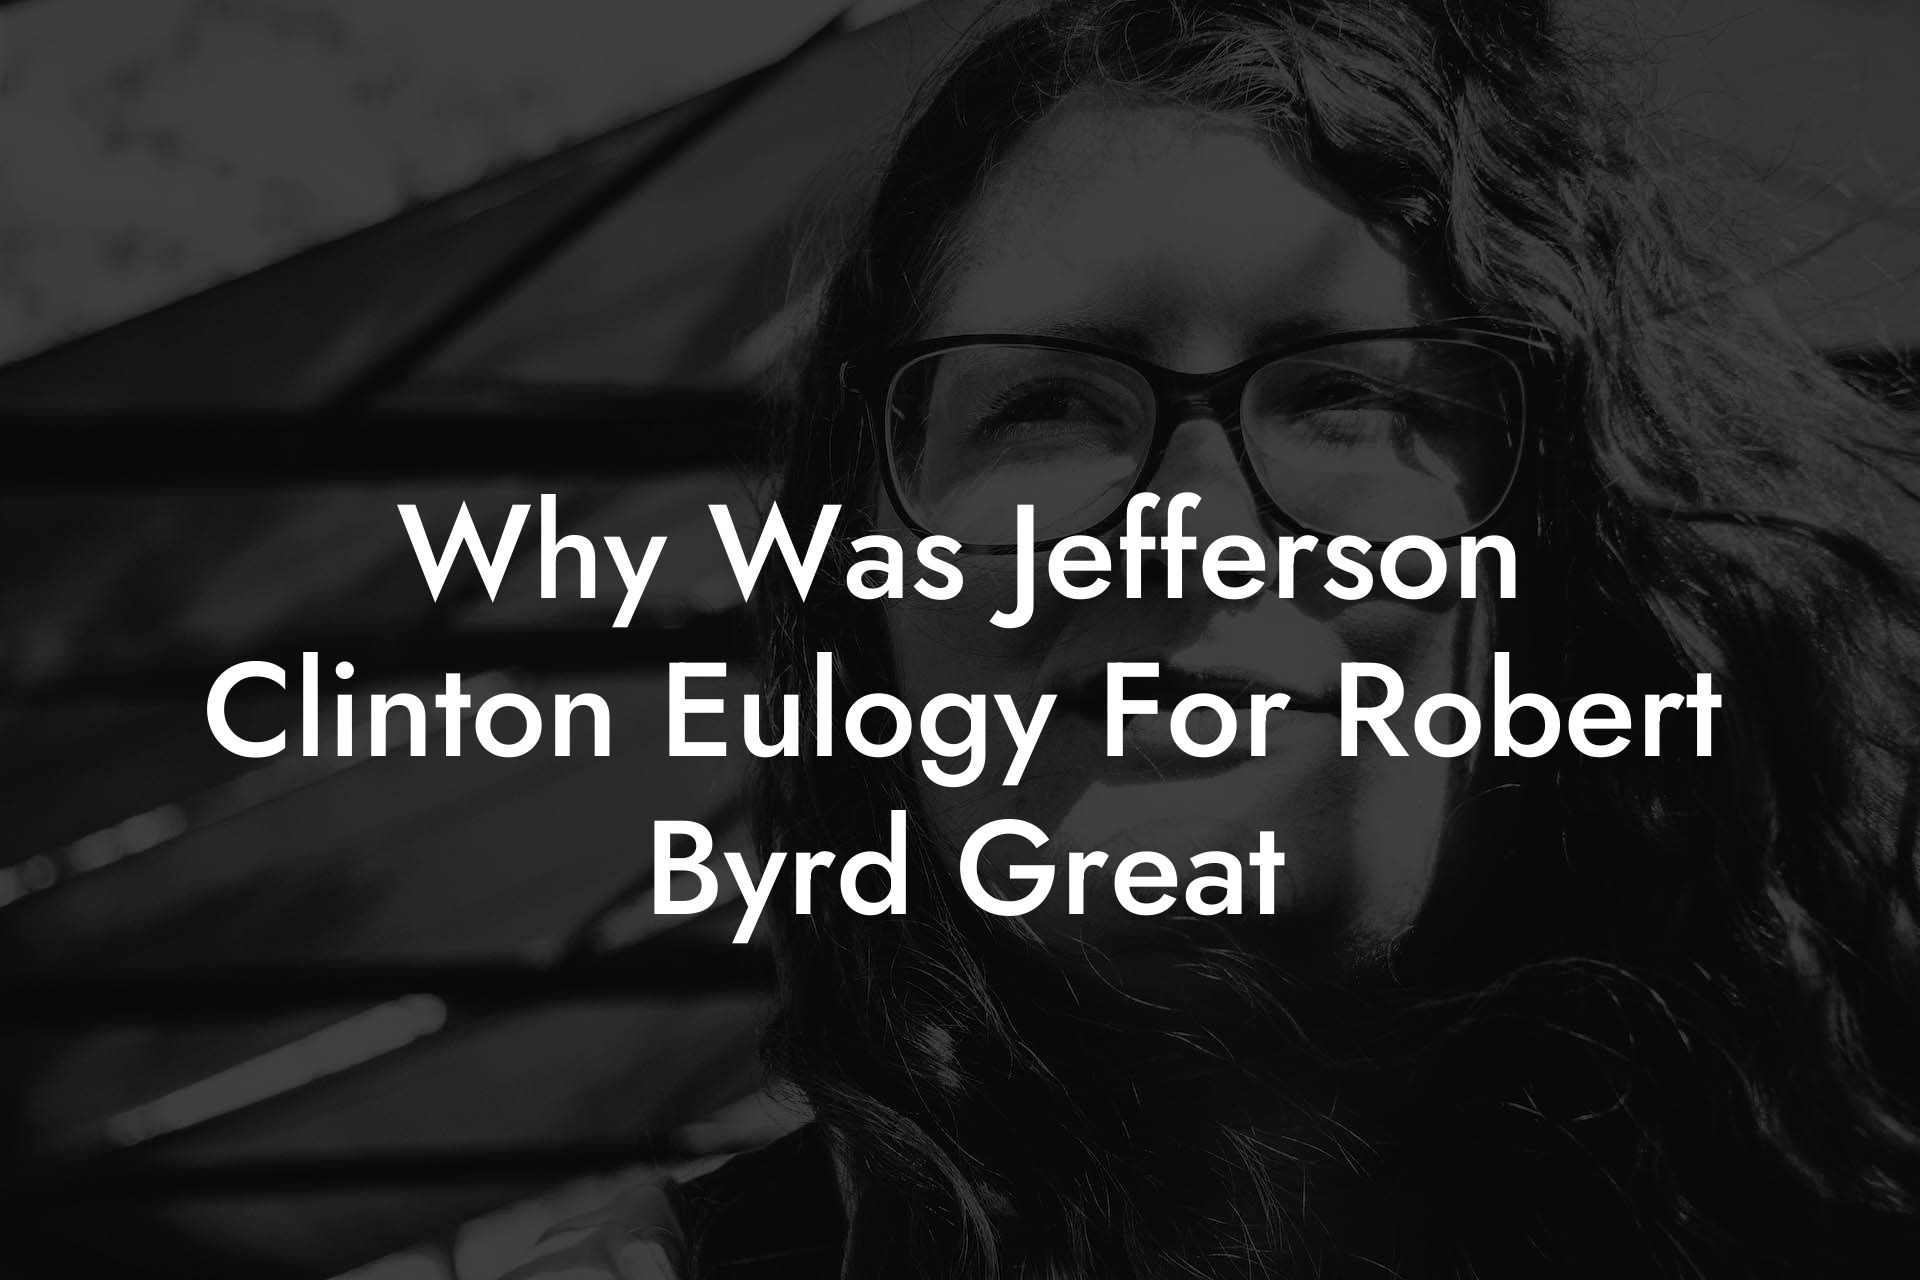 Why Was Jefferson Clinton Eulogy For Robert Byrd Great